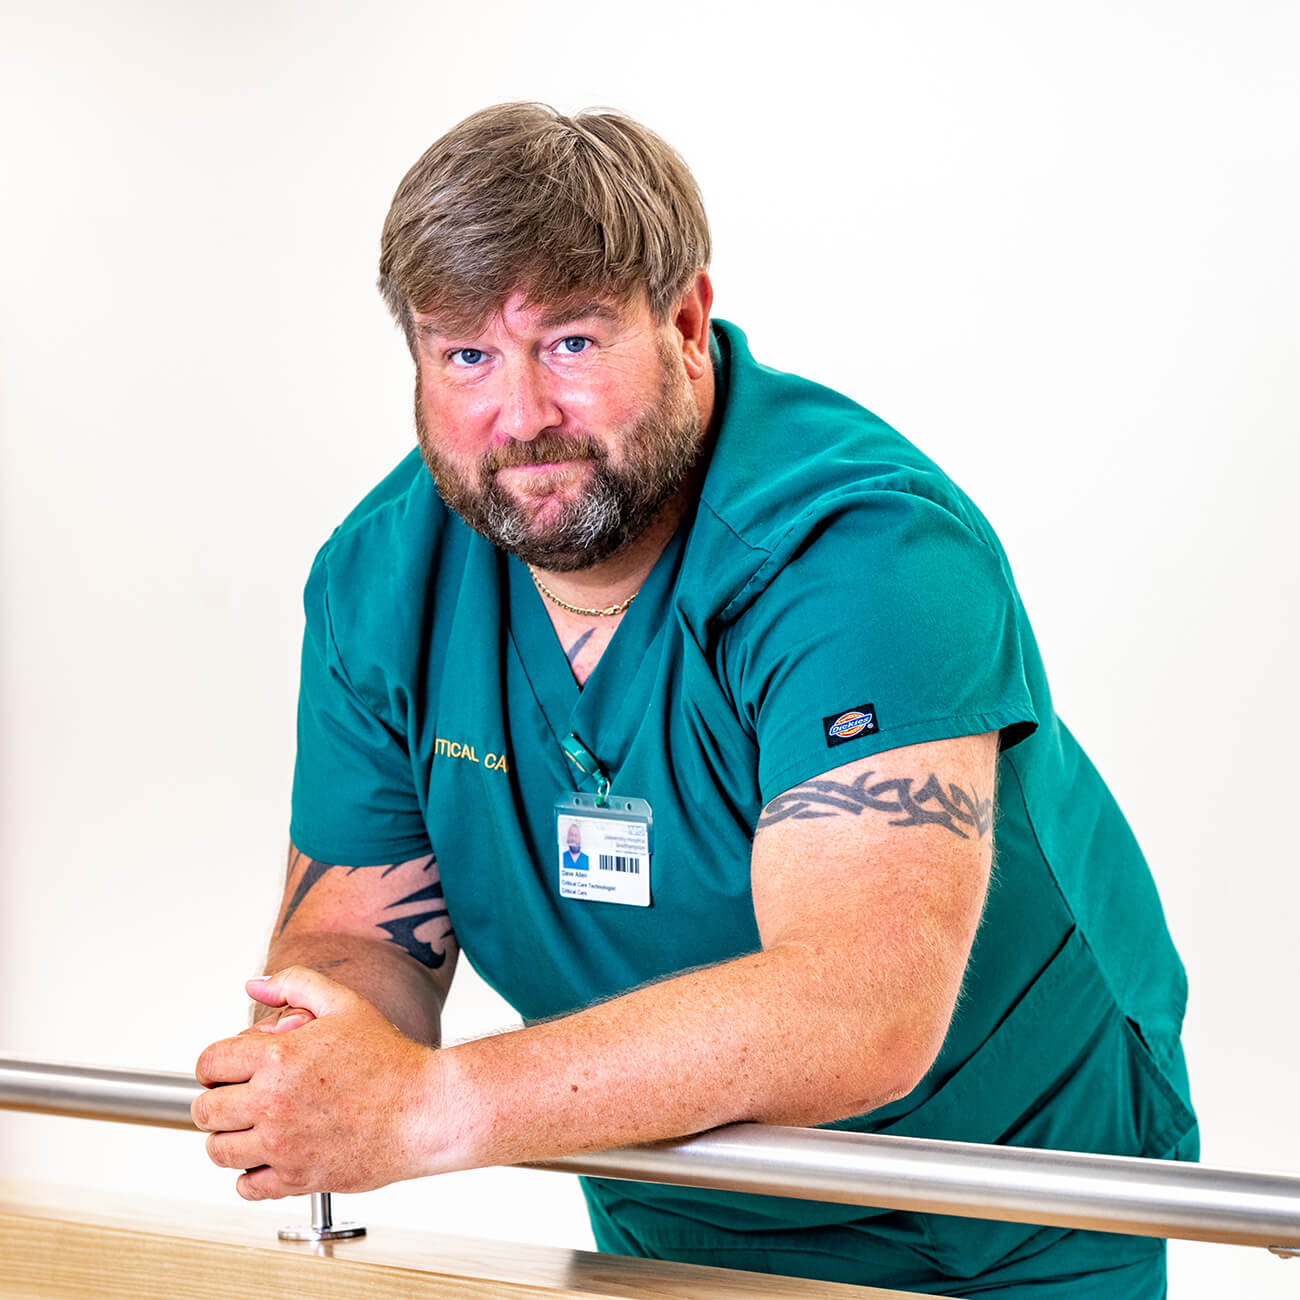 A male healthcare professional with a beard, wearing green scrubs and an id badge, leaning on a railing in a clinical setting and looking at the camera.